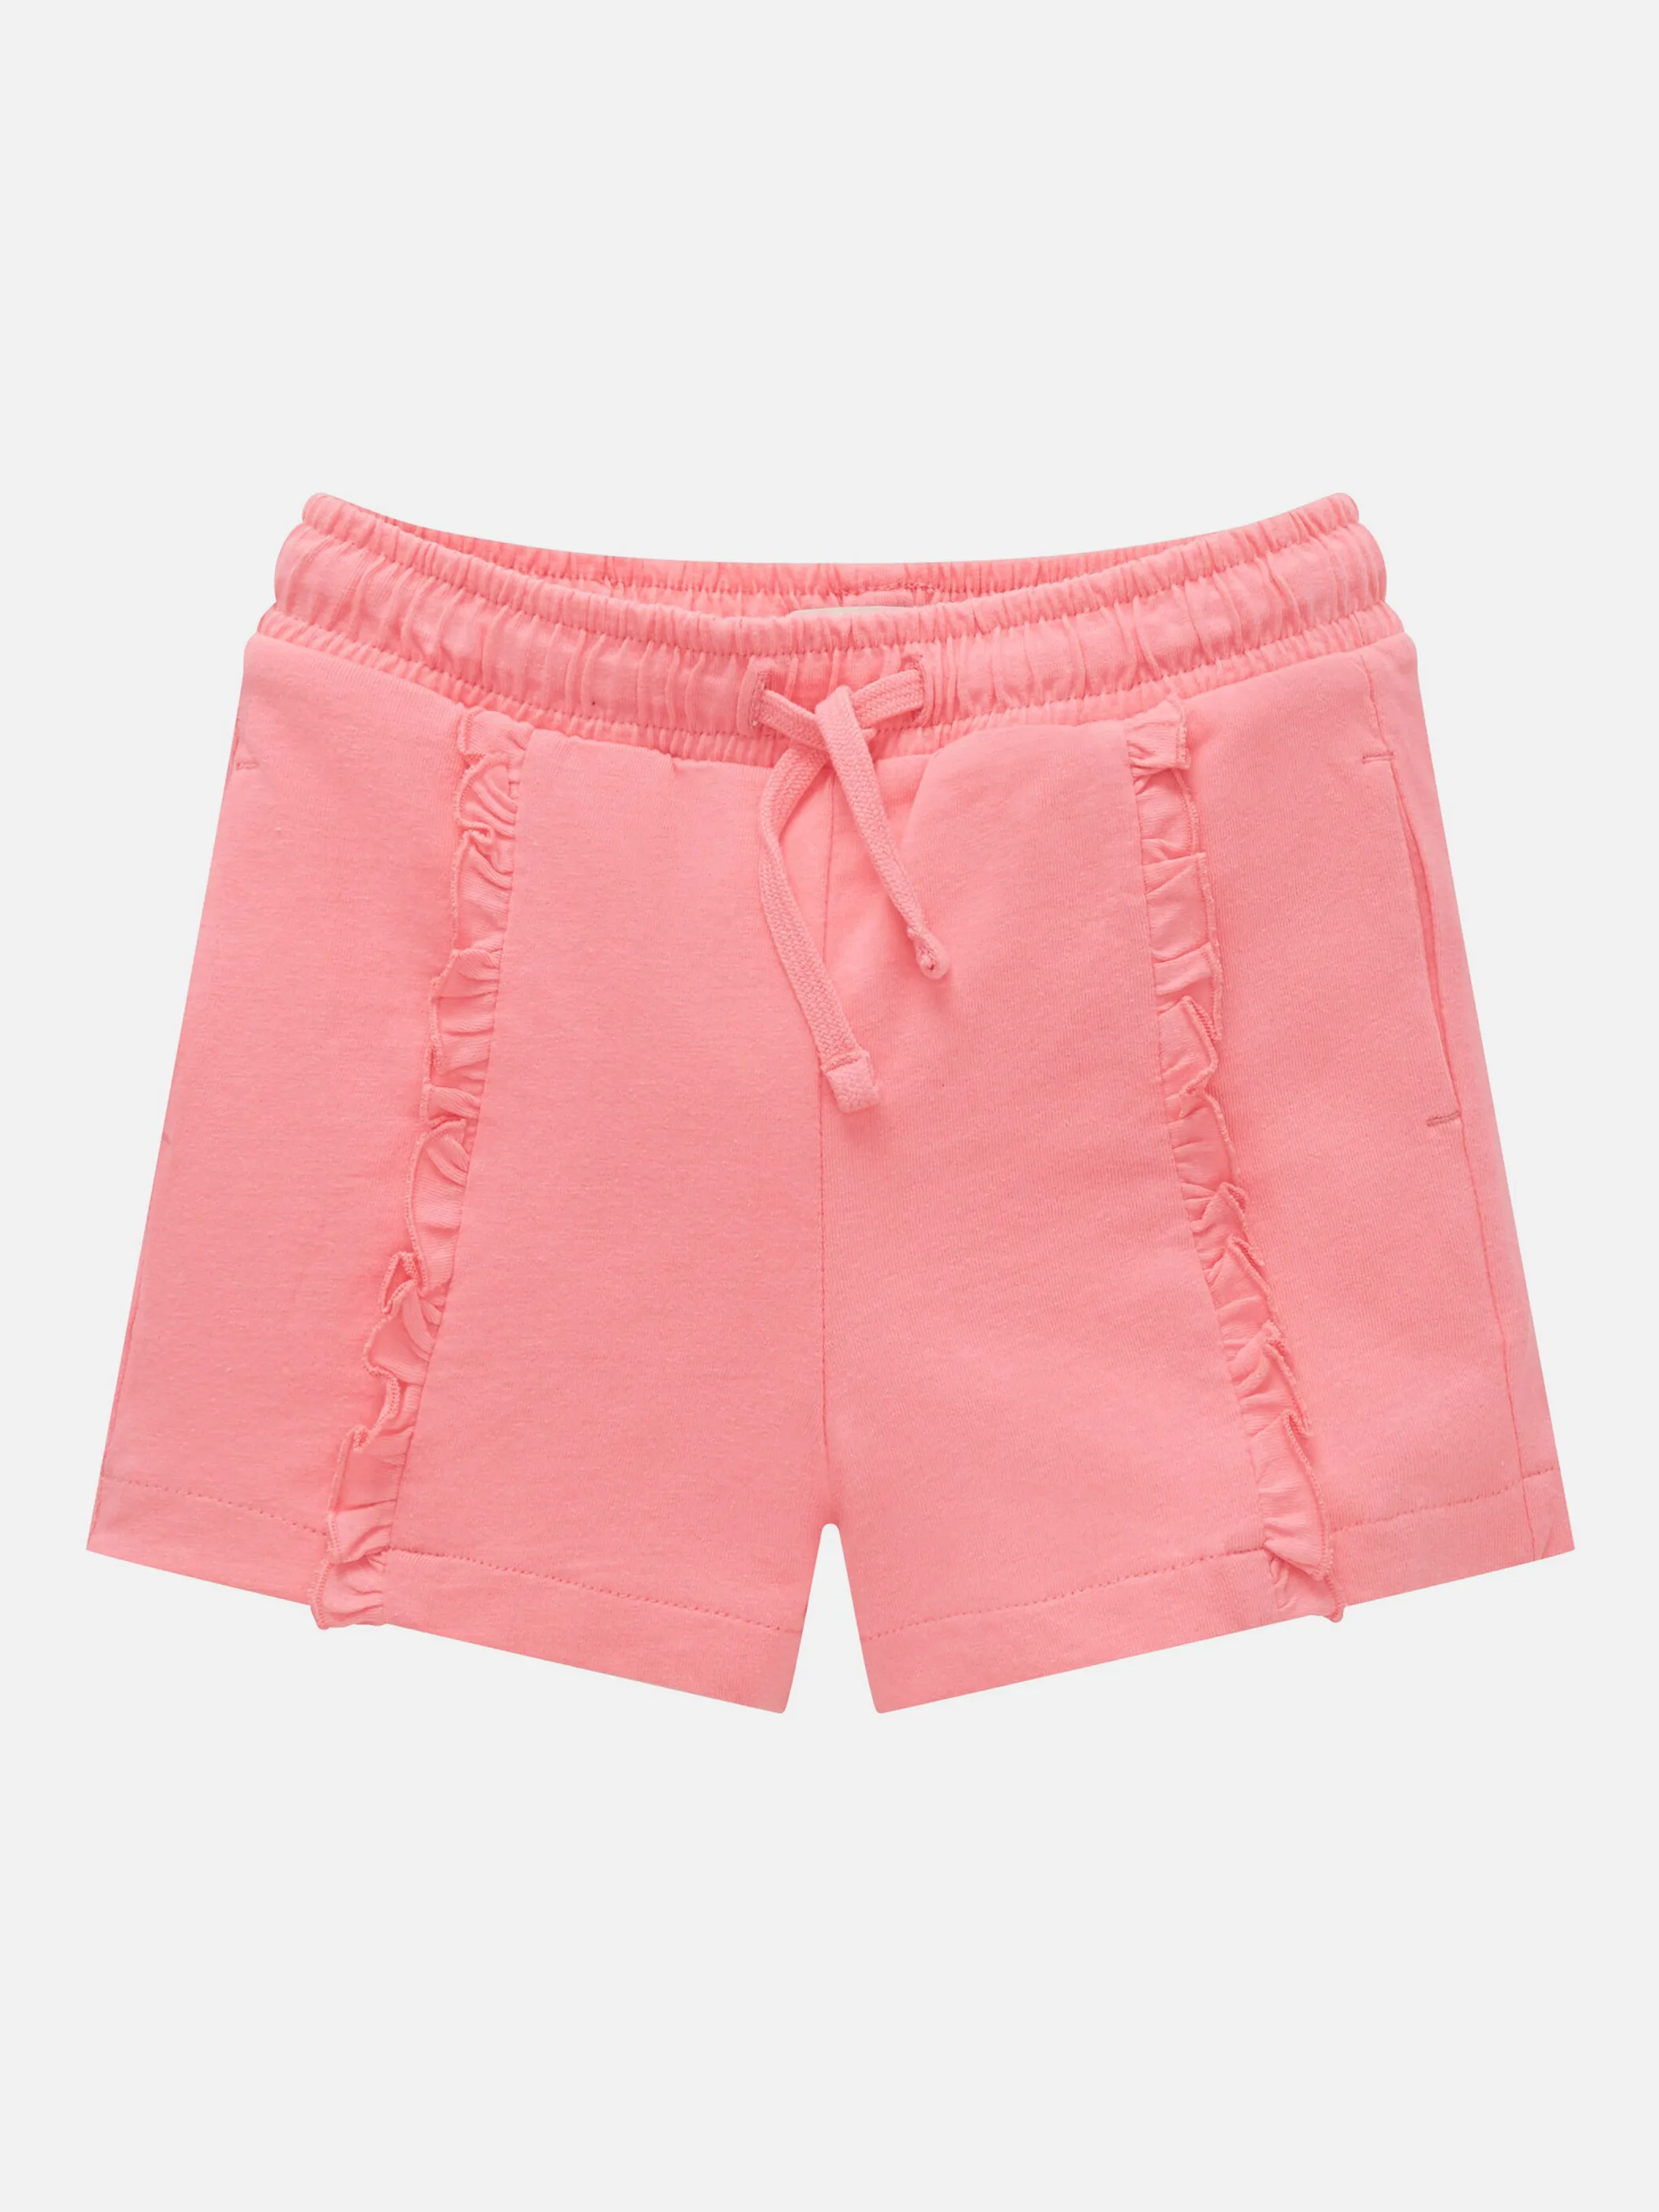 Tom Tailor 1031843 ruffled jersey shorts Pink 865867 23807 1